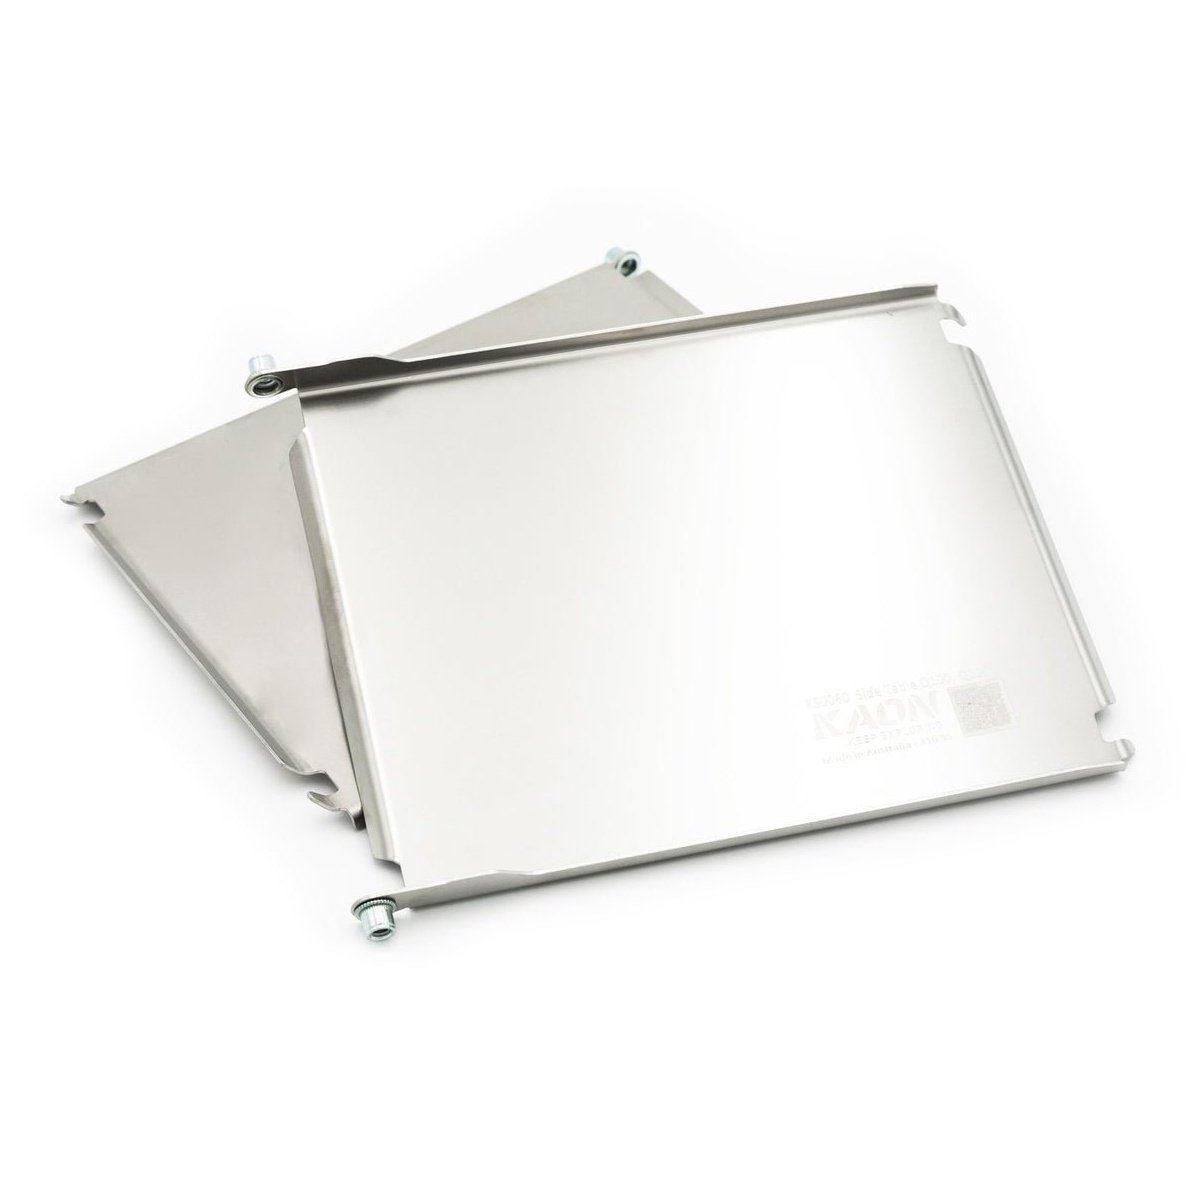 Stainless Steel Side Tables to suit Weber* Q - AMD Touring